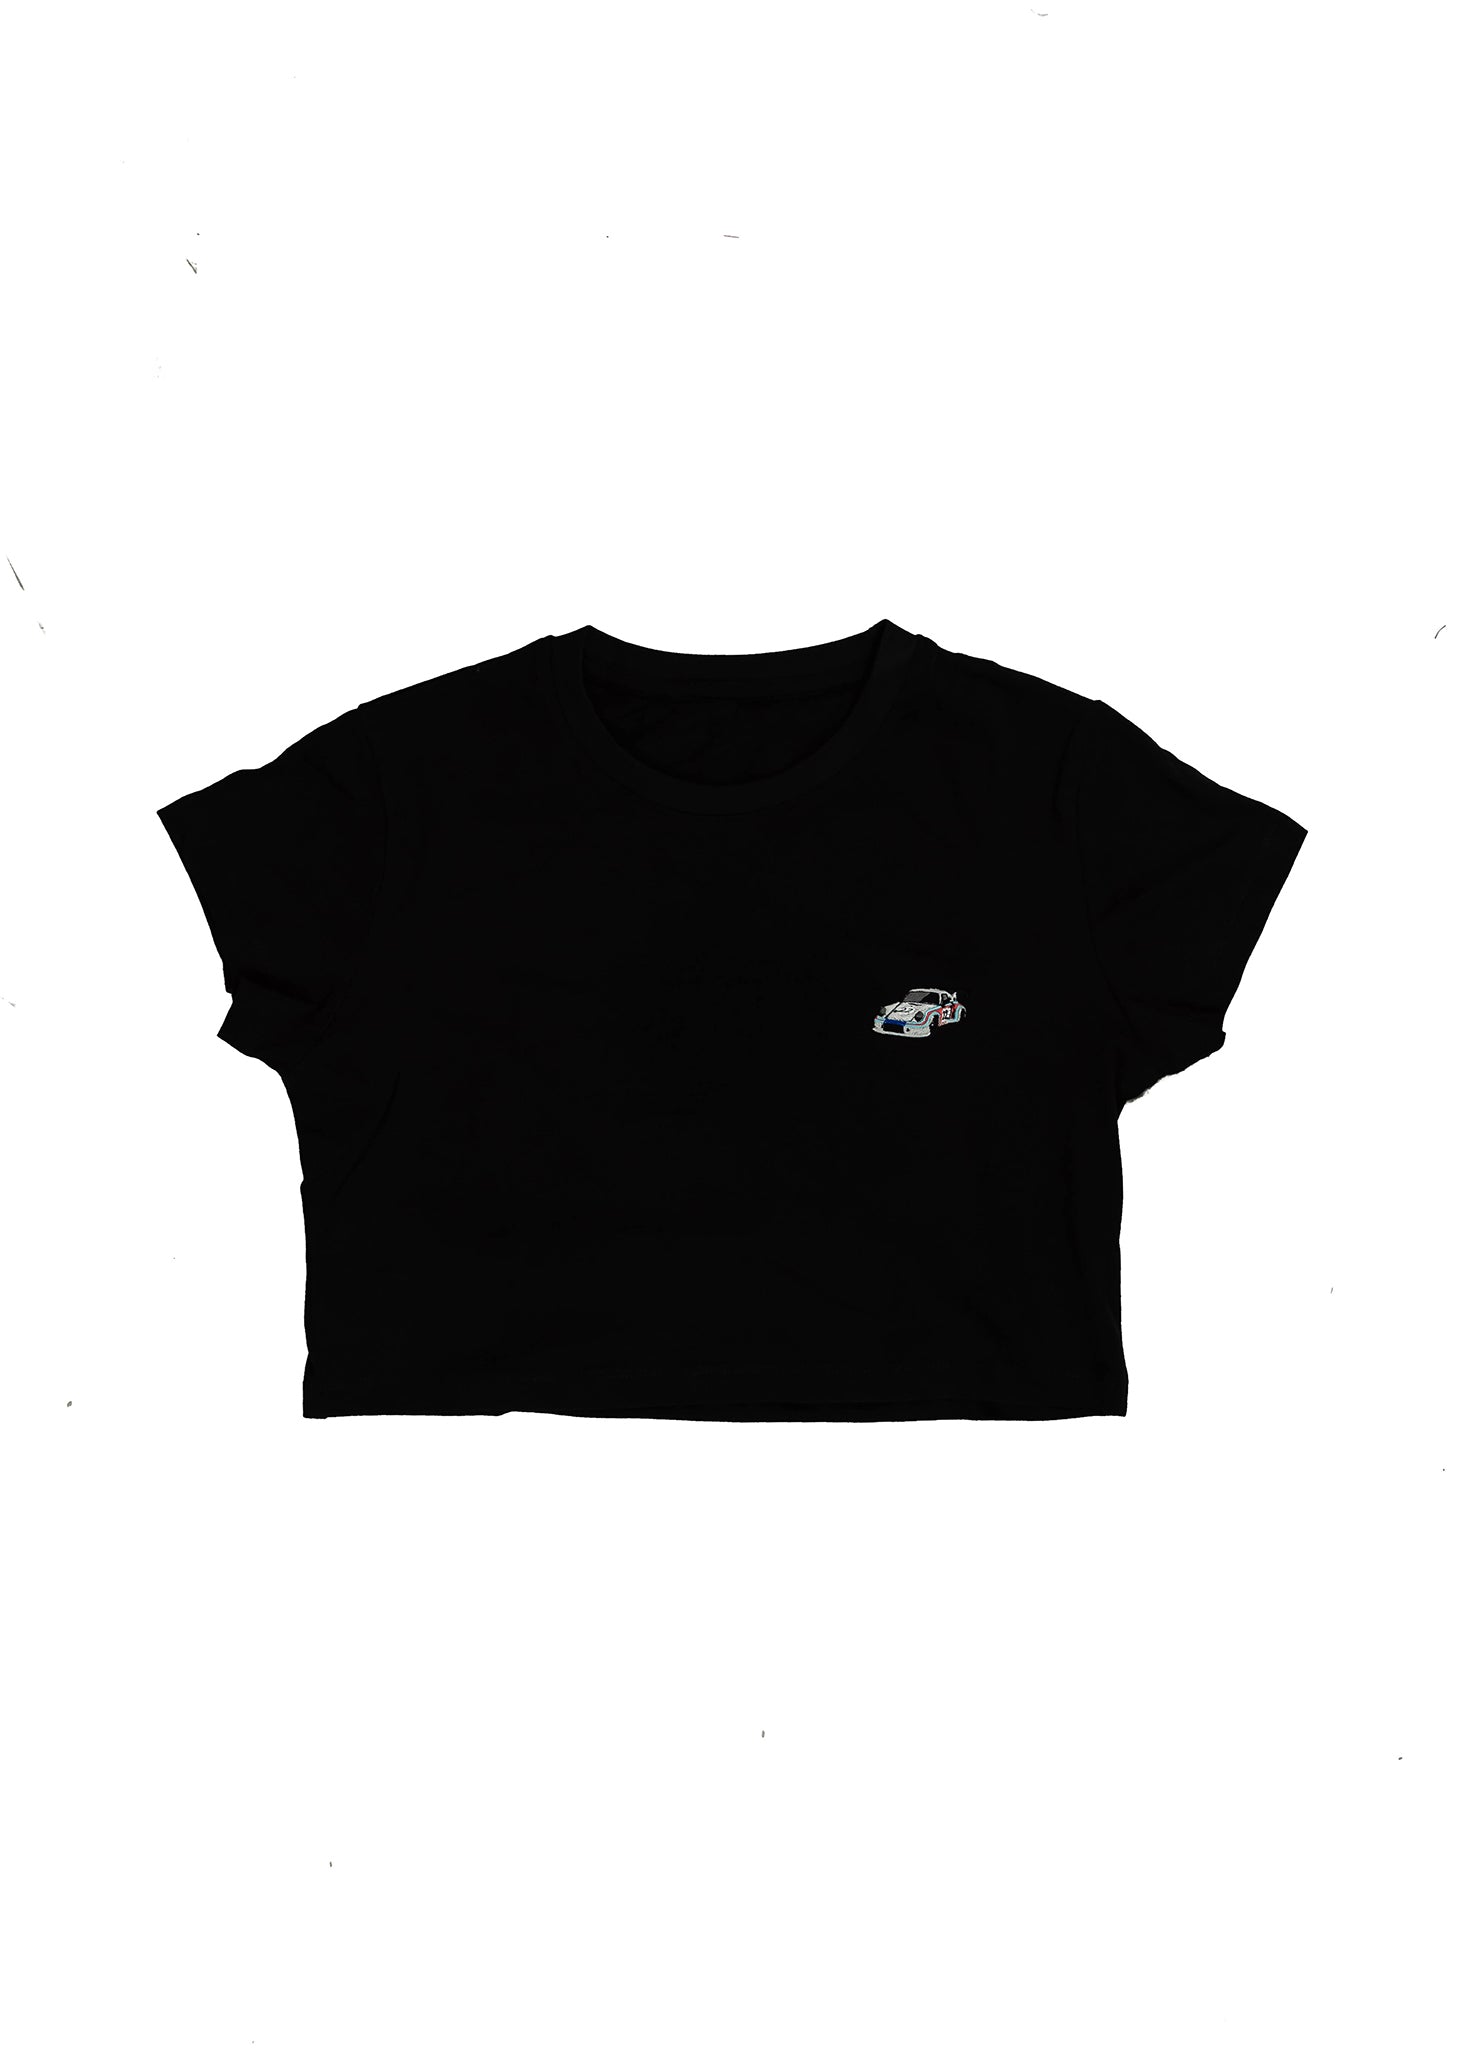 A black women's high quality cropped t-shirt. Full size front view of the black shirt with an embroidered R13 1974 911 RSR Turbo. Fabric composition of this tee is 100% cotton. The material is very soft, stretchy, and non-transparent. The style of this tshirt is a crewneck, short sleeve, cropped at the waist, with embroidery on the left chest.